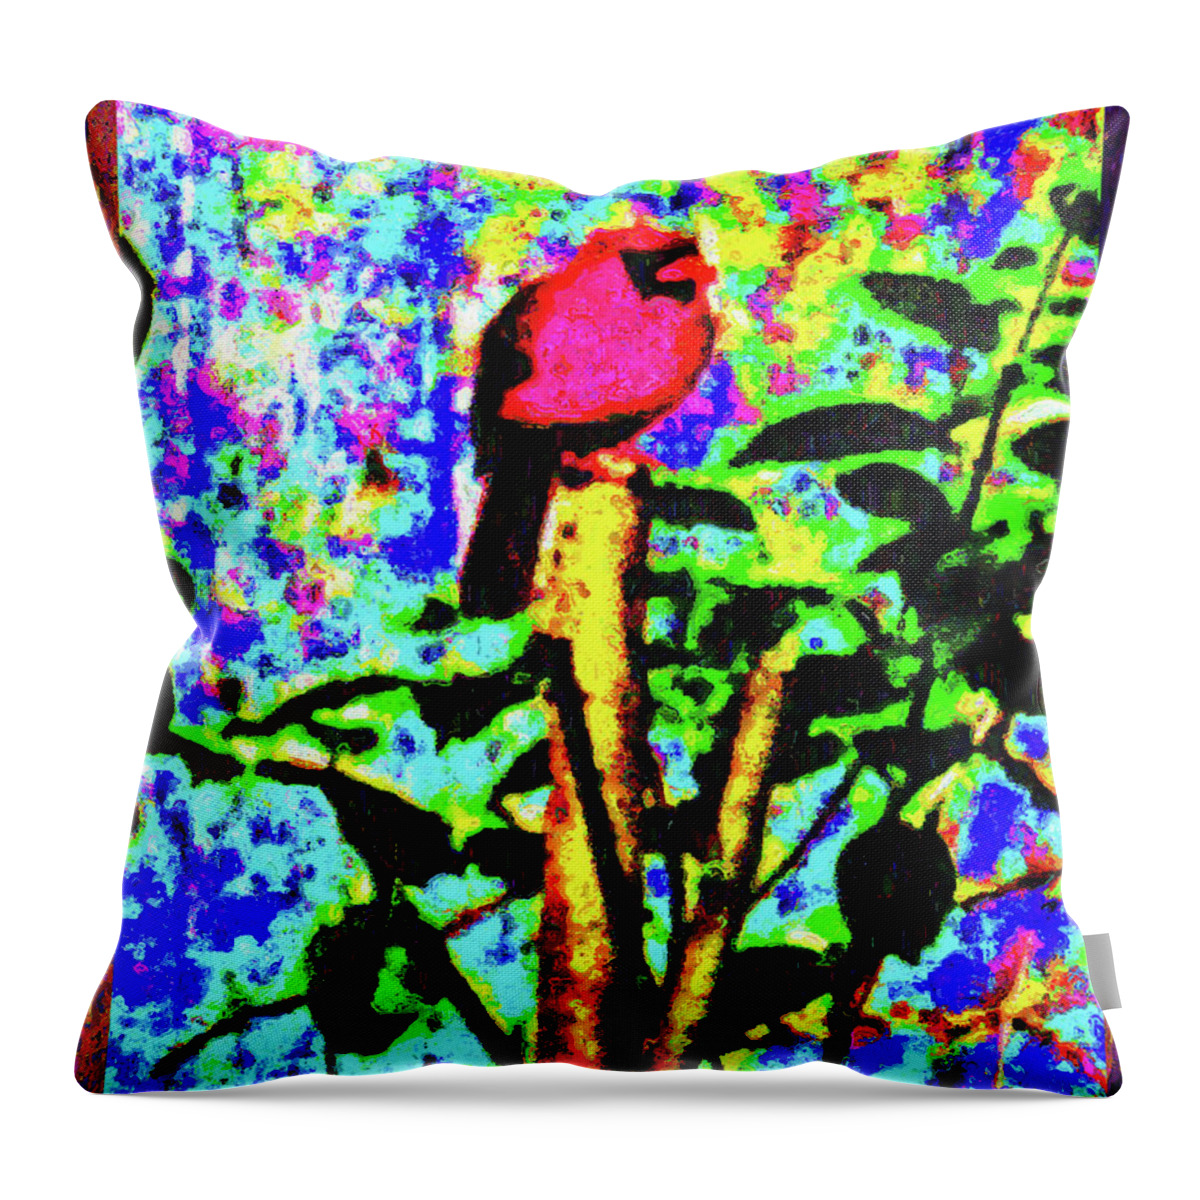 Chromatic Poetics Throw Pillow featuring the digital art Redbird Dreaming about Why Love is Always Important by Aberjhani